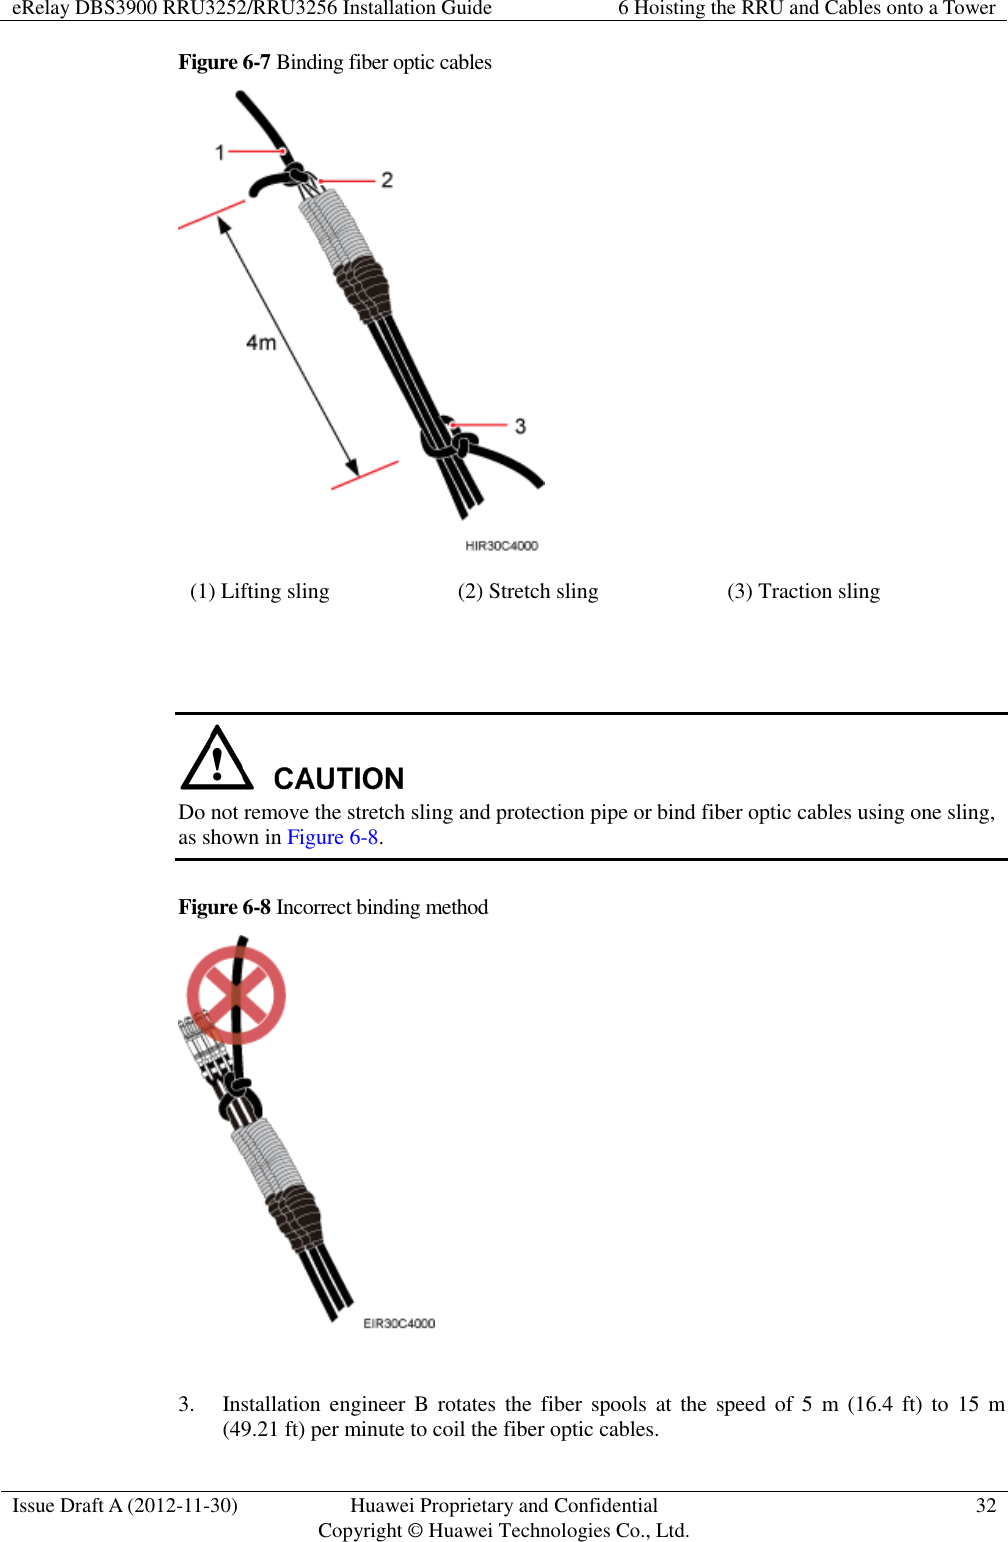 eRelay DBS3900 RRU3252/RRU3256 Installation Guide 6 Hoisting the RRU and Cables onto a Tower  Issue Draft A (2012-11-30) Huawei Proprietary and Confidential                                     Copyright © Huawei Technologies Co., Ltd. 32  Figure 6-7 Binding fiber optic cables  (1) Lifting sling (2) Stretch sling (3) Traction sling    Do not remove the stretch sling and protection pipe or bind fiber optic cables using one sling, as shown in Figure 6-8. Figure 6-8 Incorrect binding method   3. Installation engineer  B  rotates the  fiber spools at  the  speed of  5  m  (16.4  ft)  to  15  m (49.21 ft) per minute to coil the fiber optic cables. 